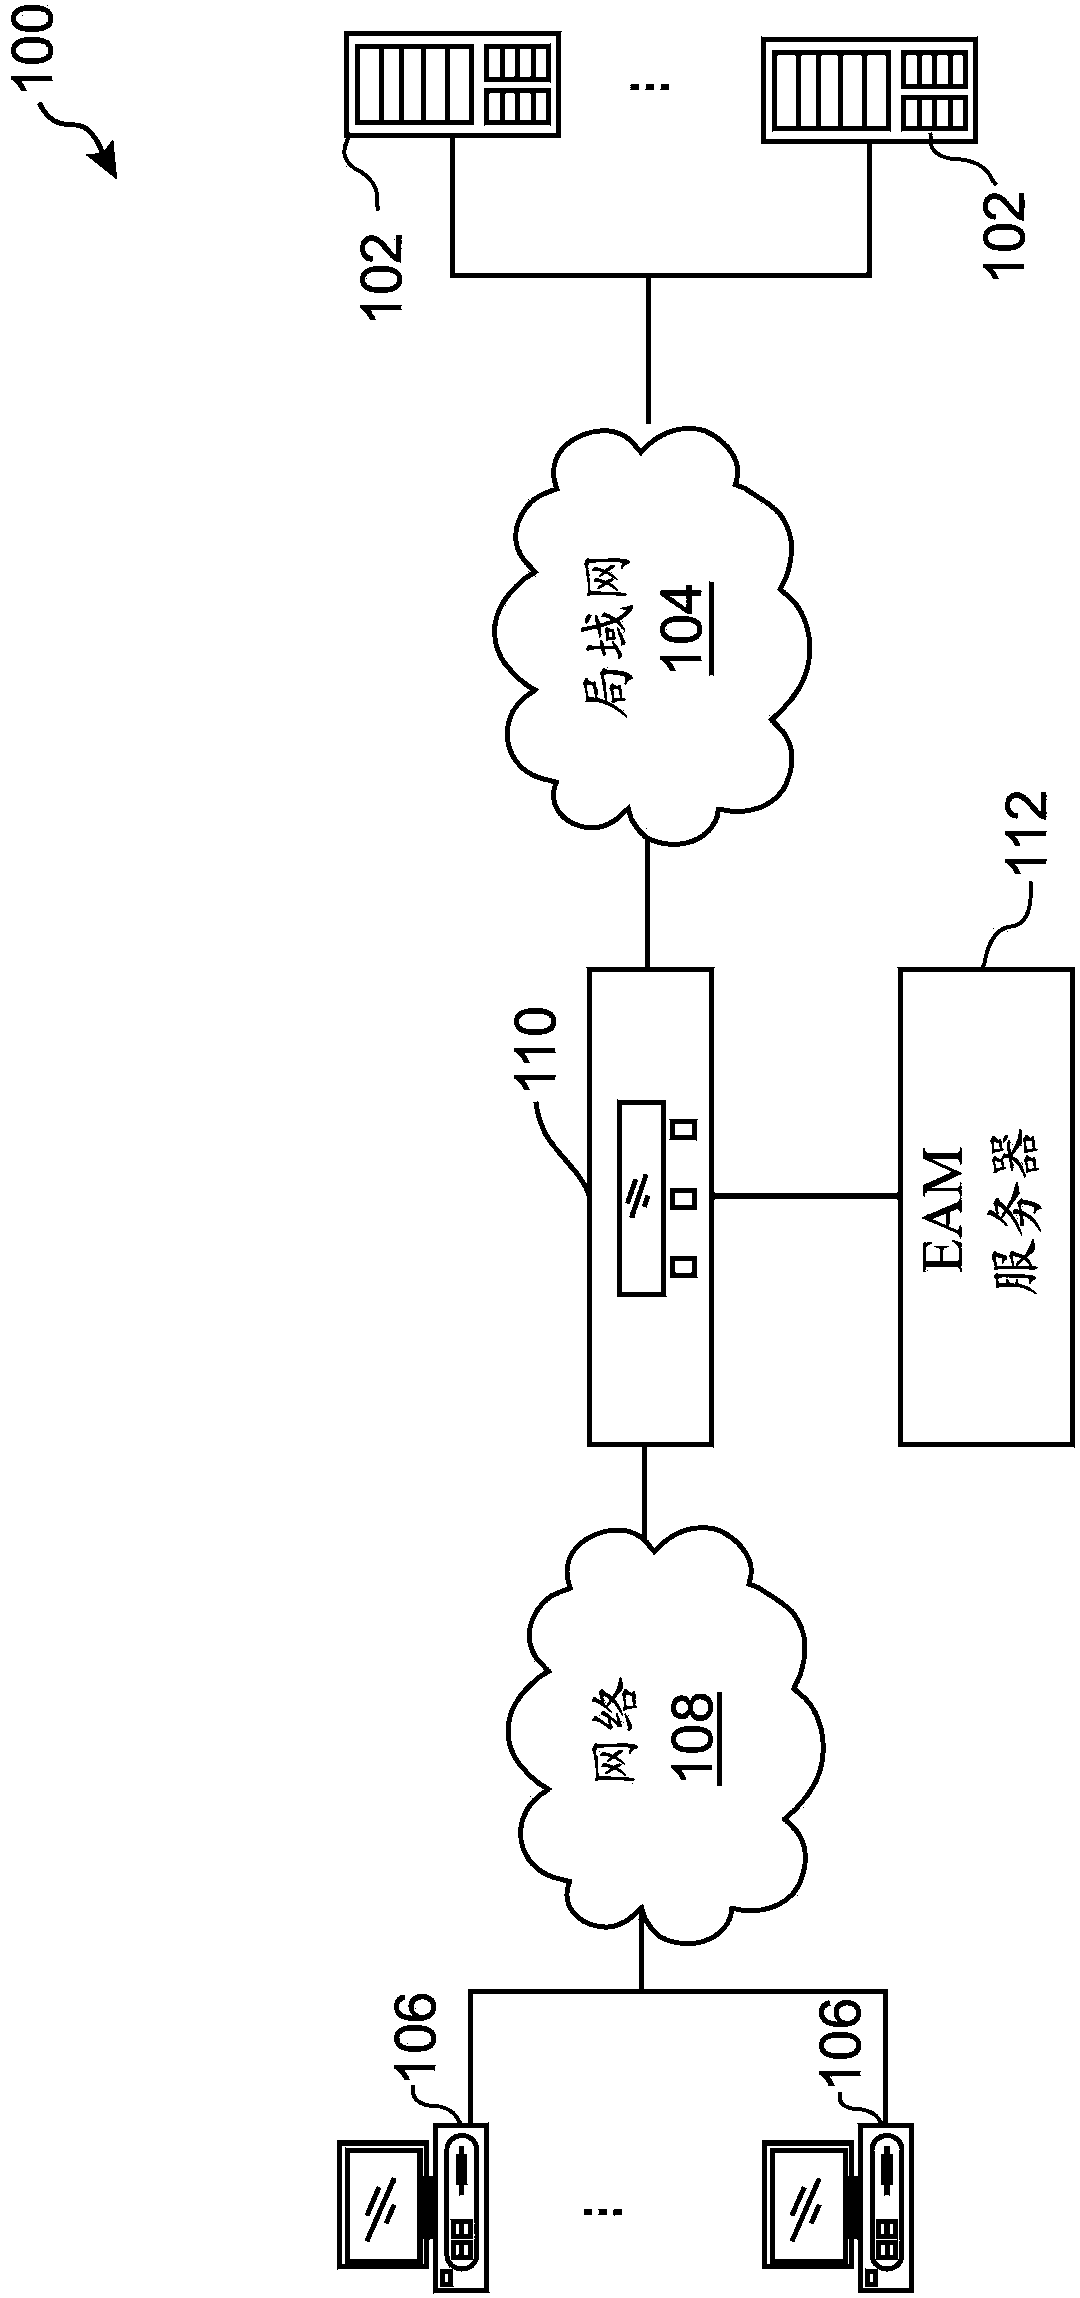 System and method for combining an access control system with a traffic management system